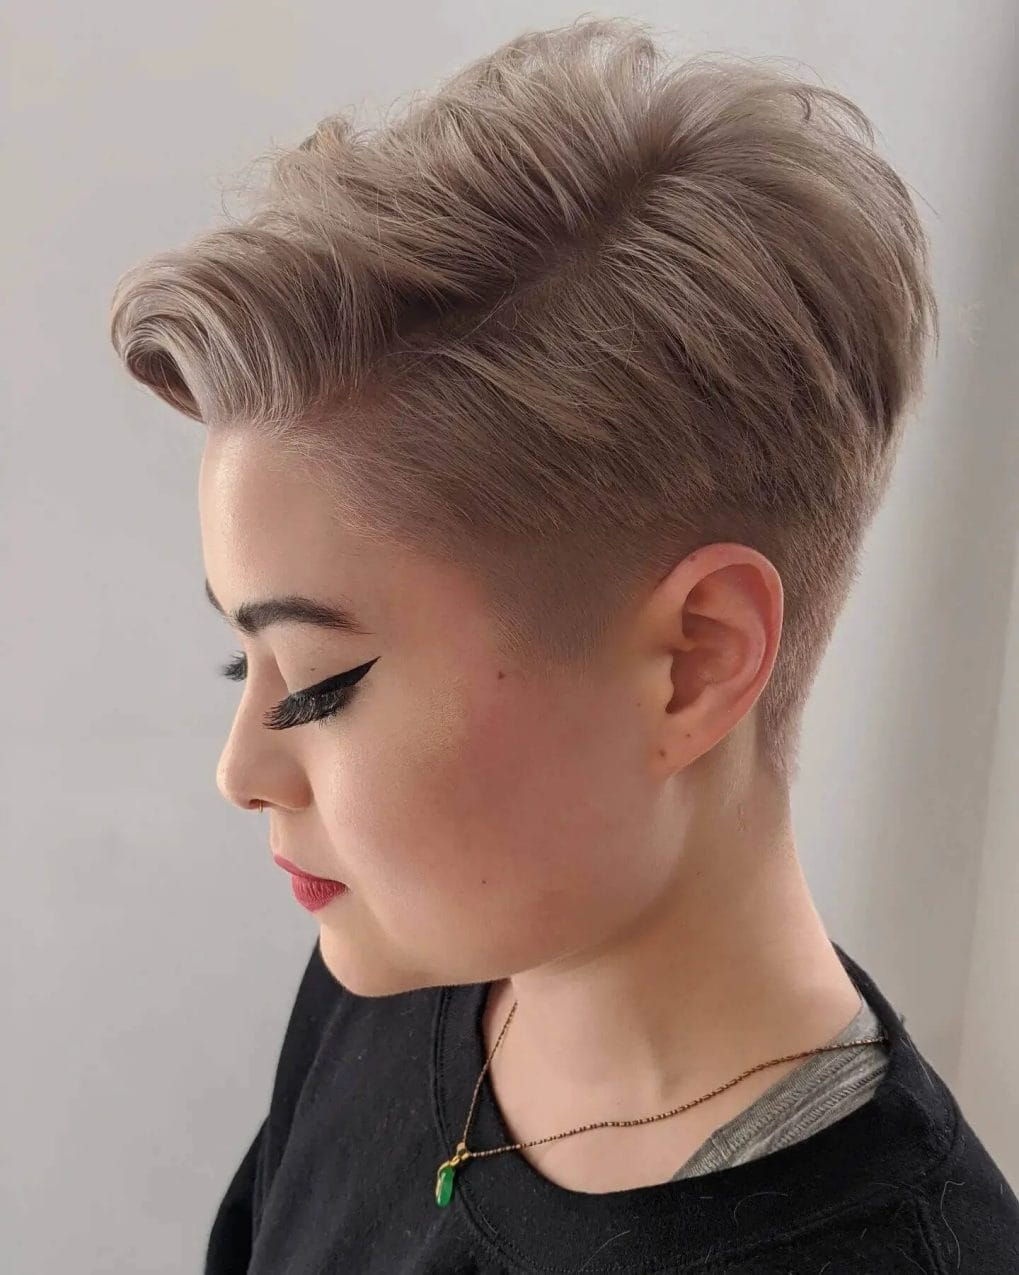 Icy bleach blonde pixie with a swept-back elegance.